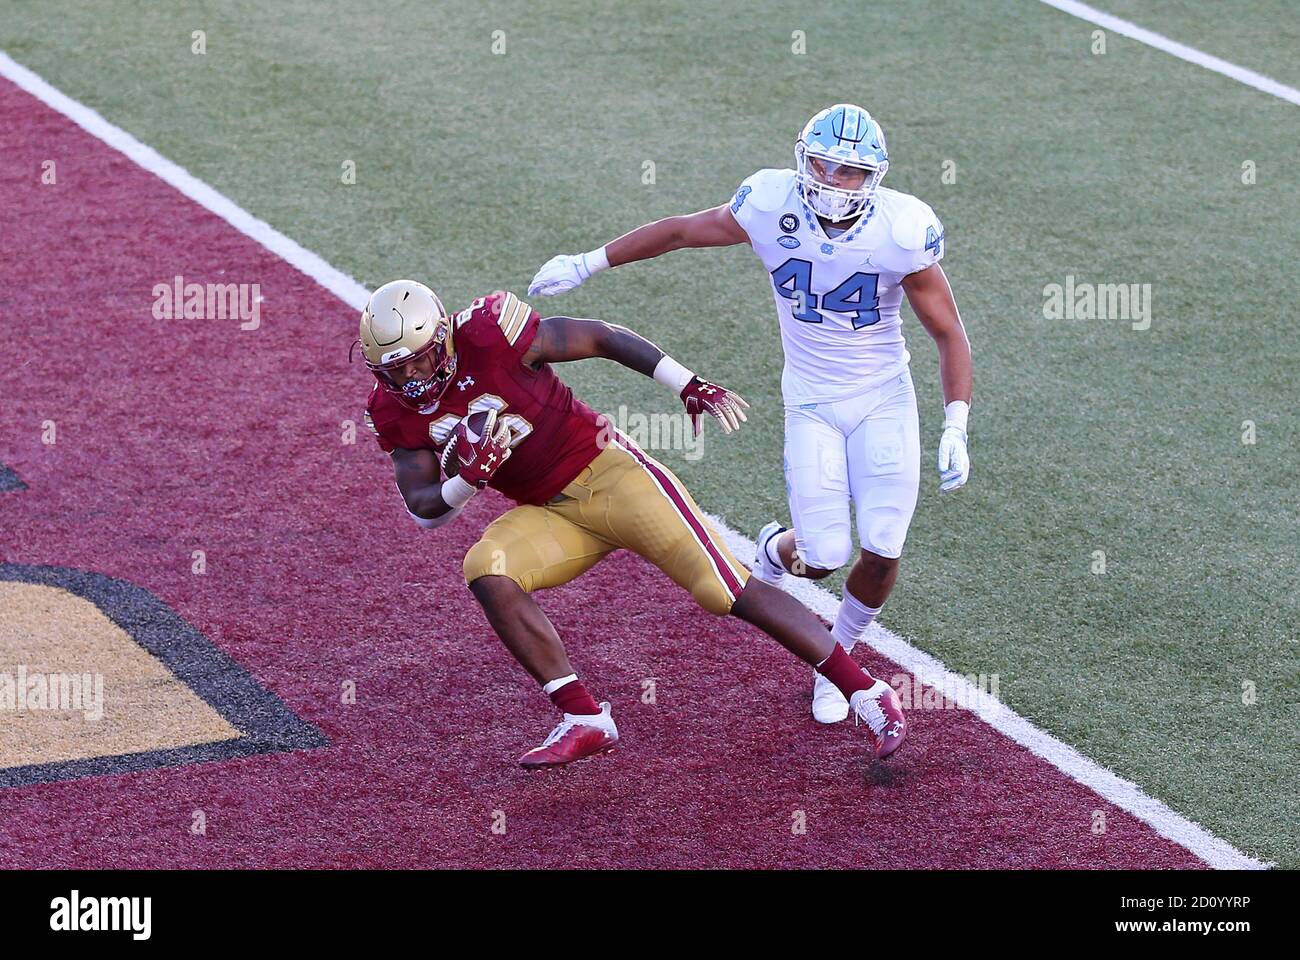 Alumni Stadium. 3rd Oct, 2020. MA, USA; Boston College Eagles running back David Bailey (26) scores a touchdown while defended by North Carolina Tar Heels linebacker Jeremiah Gemmel (44) during the NCAA football game between North Carolina Tar Heels and Boston College Eagles at Alumni Stadium. Anthony Nesmith/CSM/Alamy Live News Stock Photo